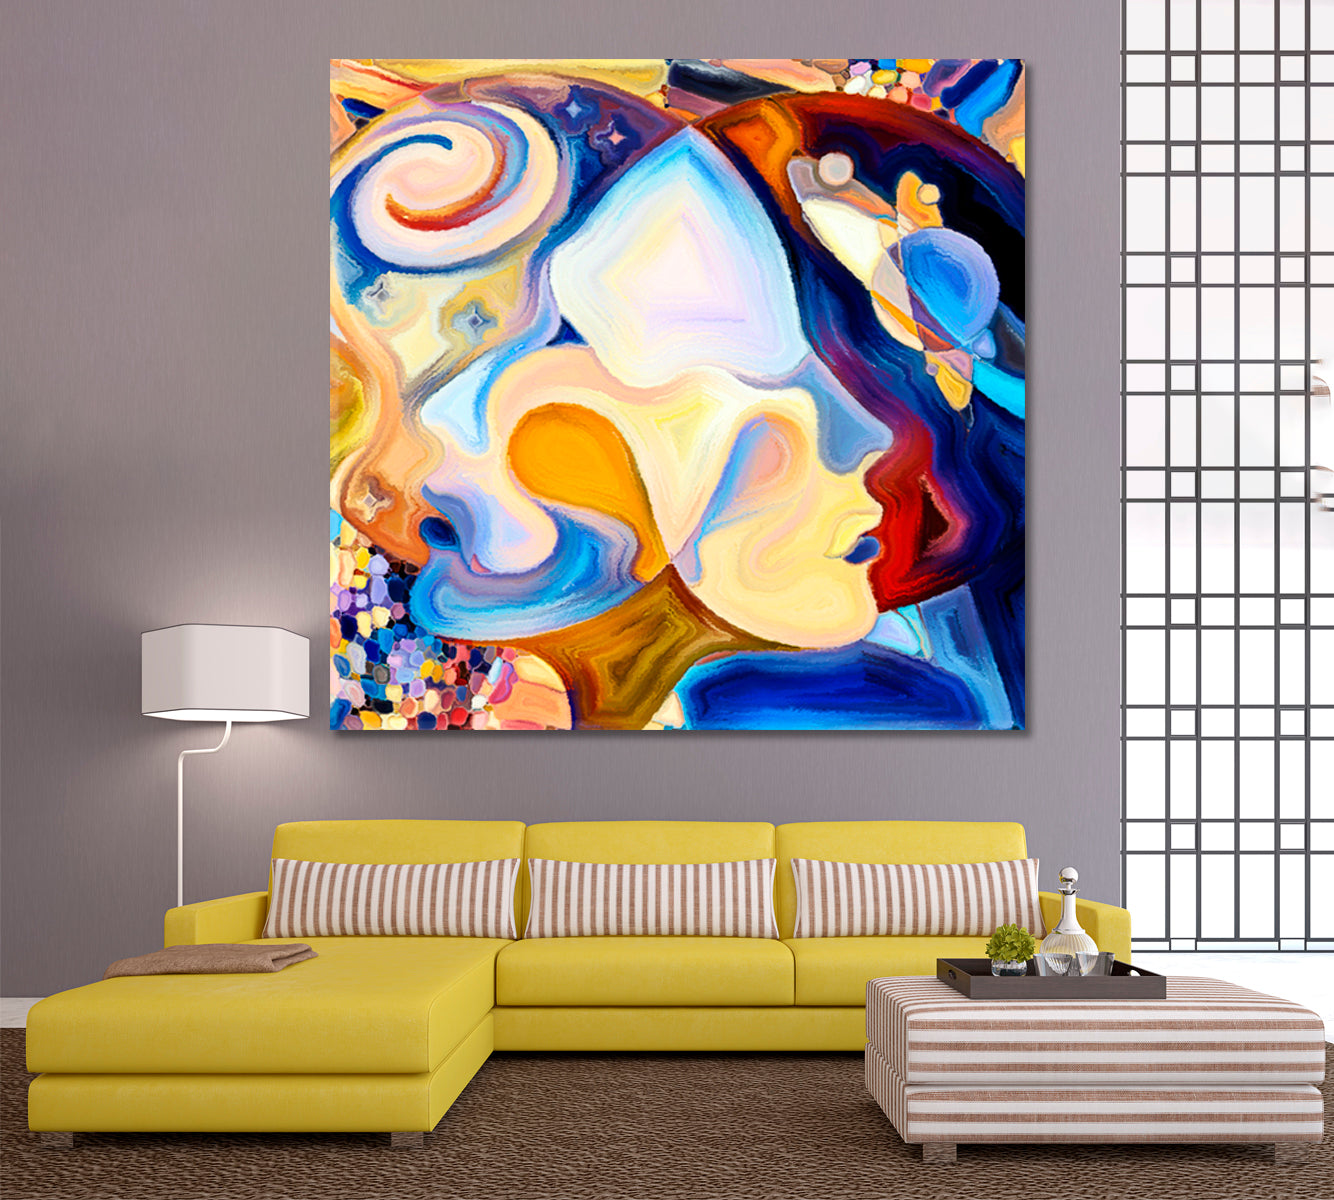 MALE AND FEMALE Abstract Multicolor Shapes - Square Panel Abstract Art Print Artesty   